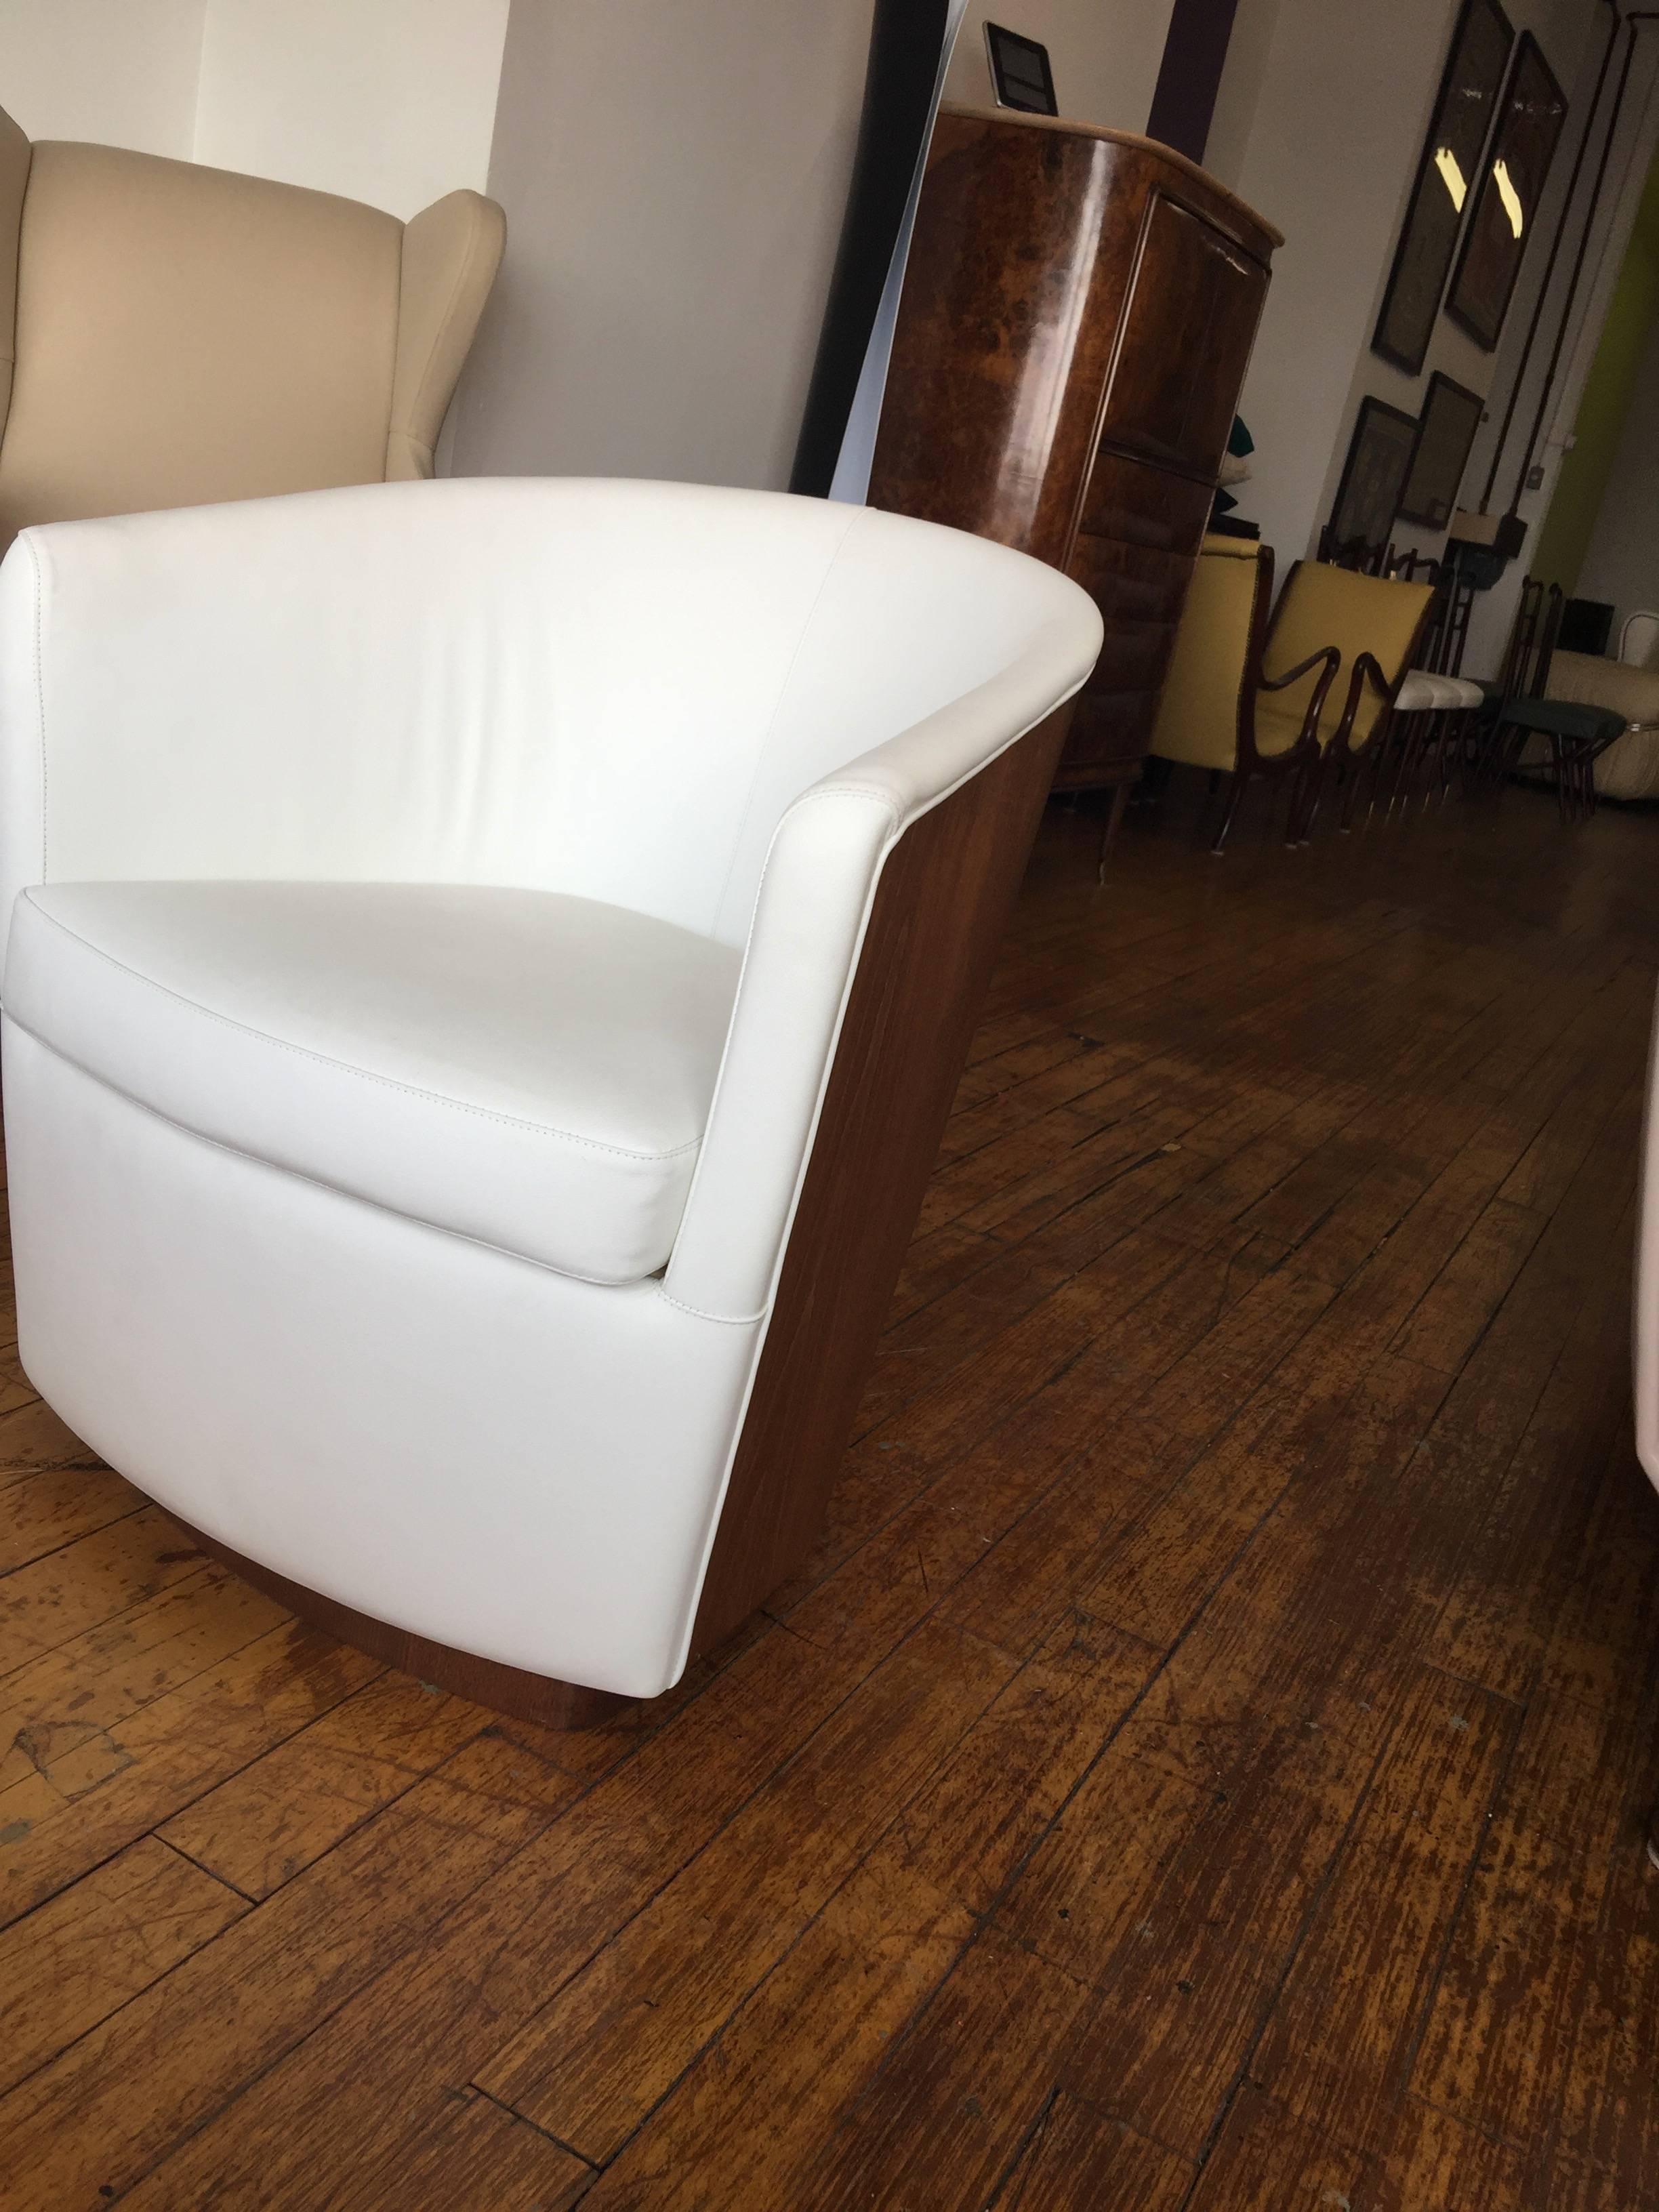 Modern Italian Designer Lounge Chair, White Leather and Walnut Wood, Italy For Sale 8